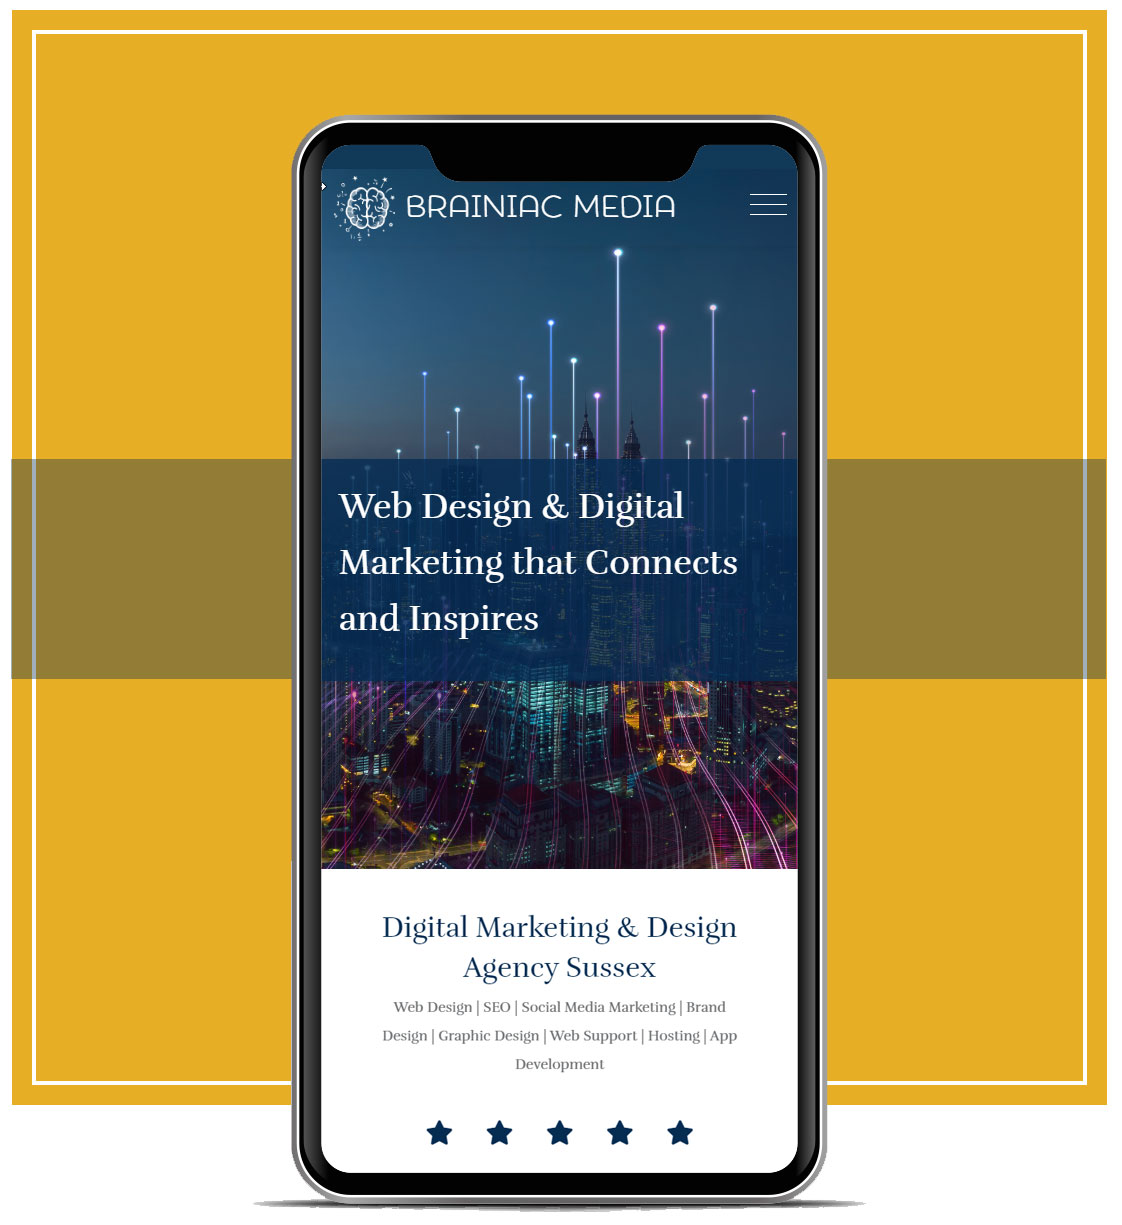 Contact us today for digital marketing